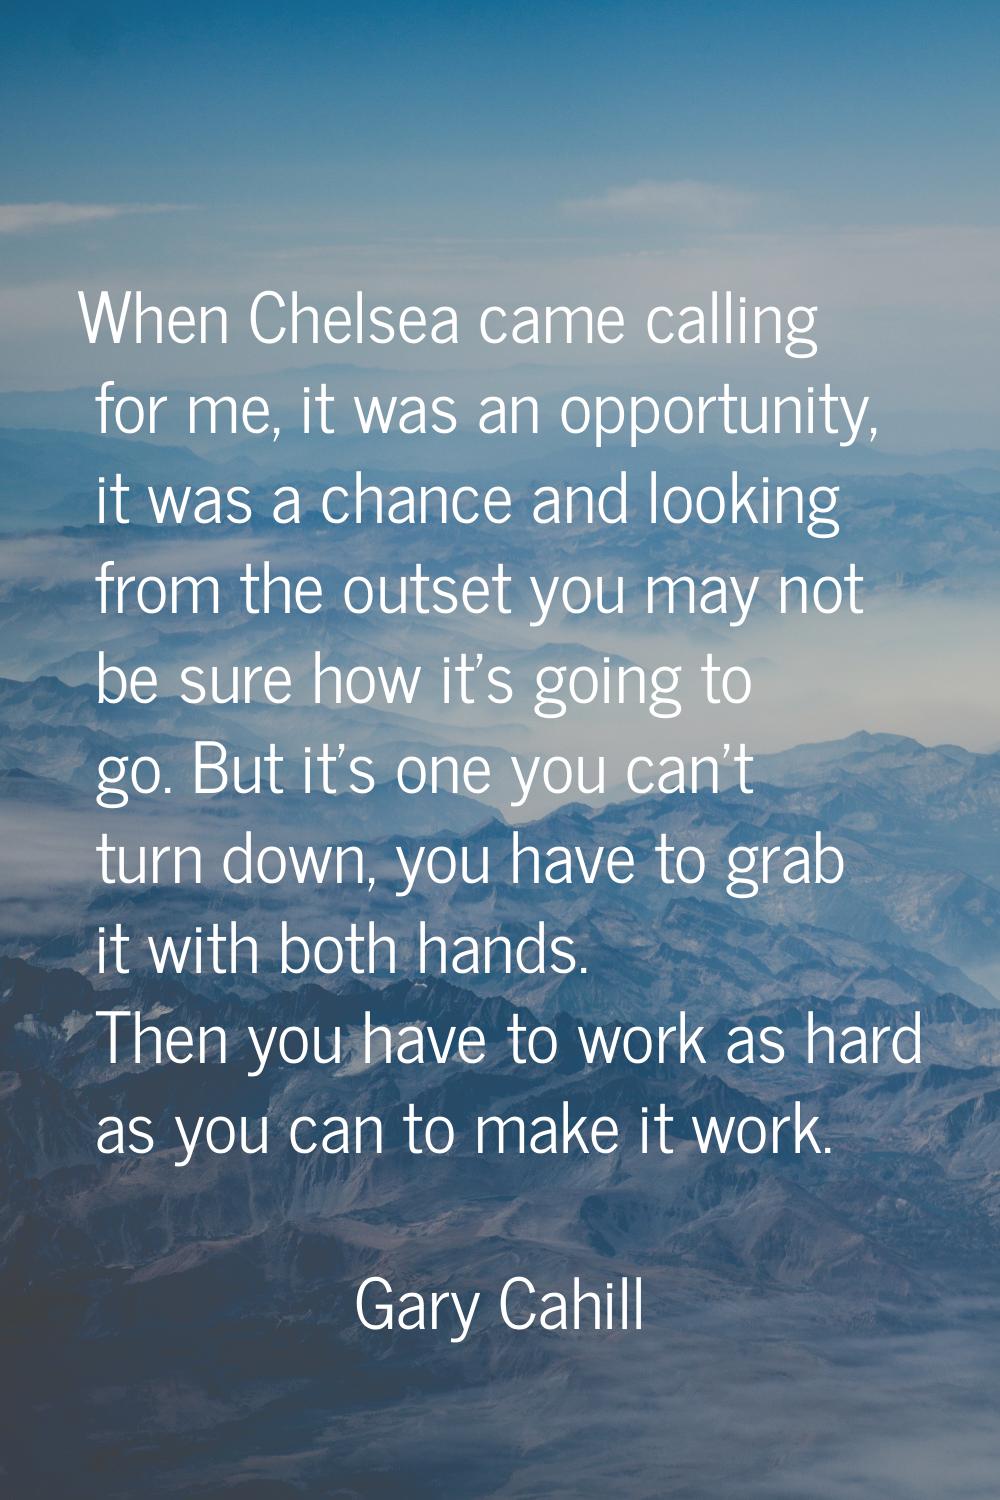 When Chelsea came calling for me, it was an opportunity, it was a chance and looking from the outse